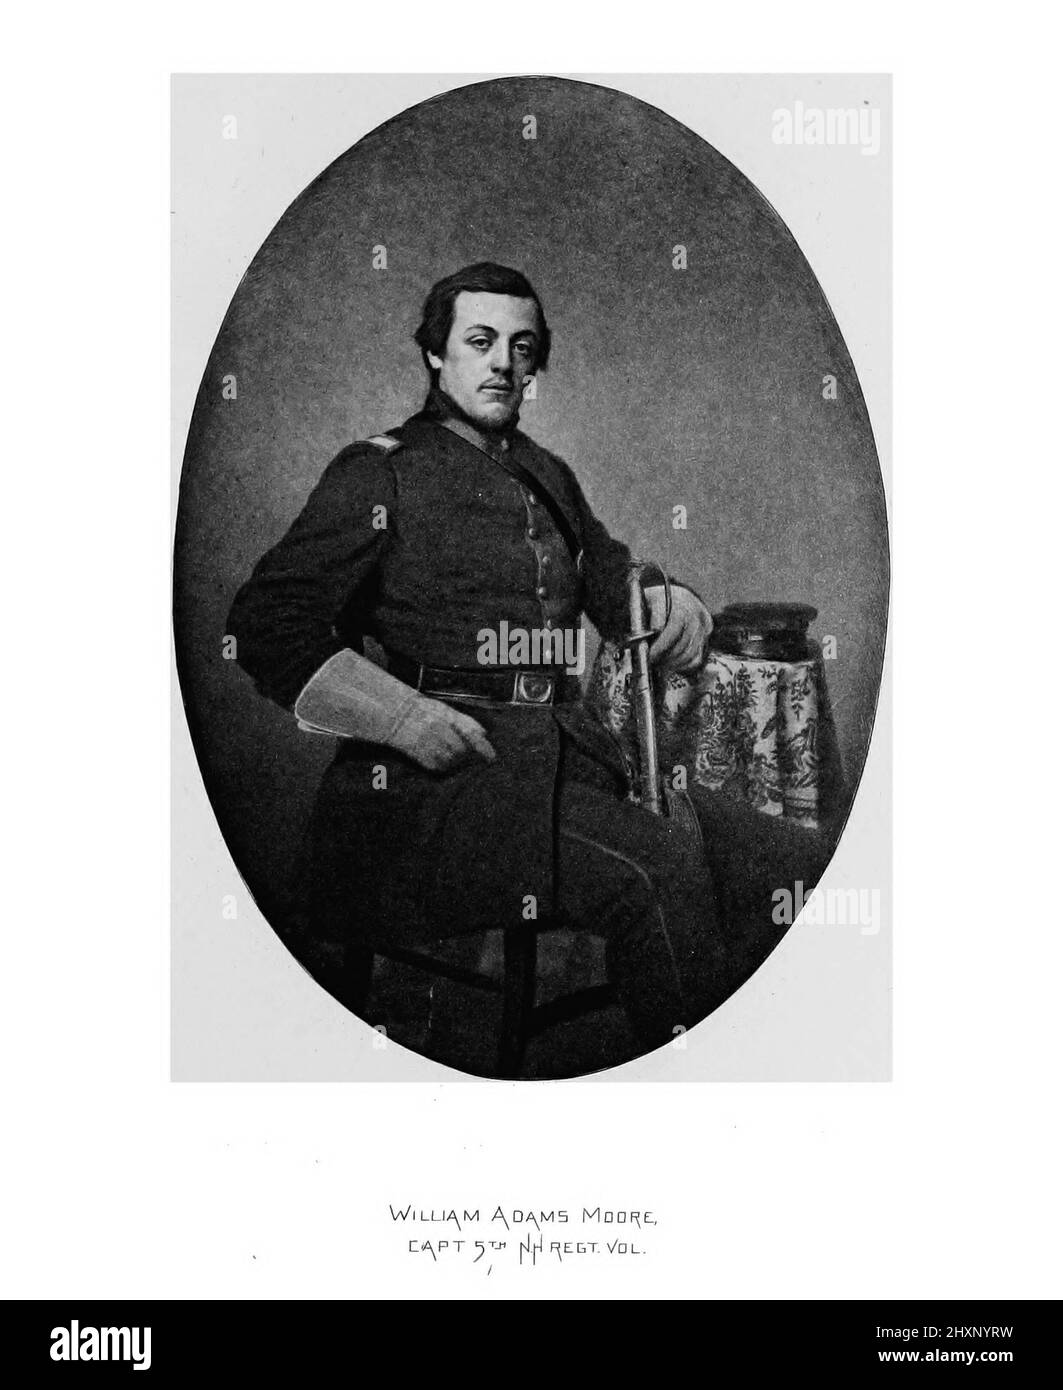 Captain William Adams Moore Portrait from the book ' A history of the Fifth regiment, New Hampshire volunteers, in the American civil war, 1861-1865 ' by William Child, Published in 1893 Stock Photo